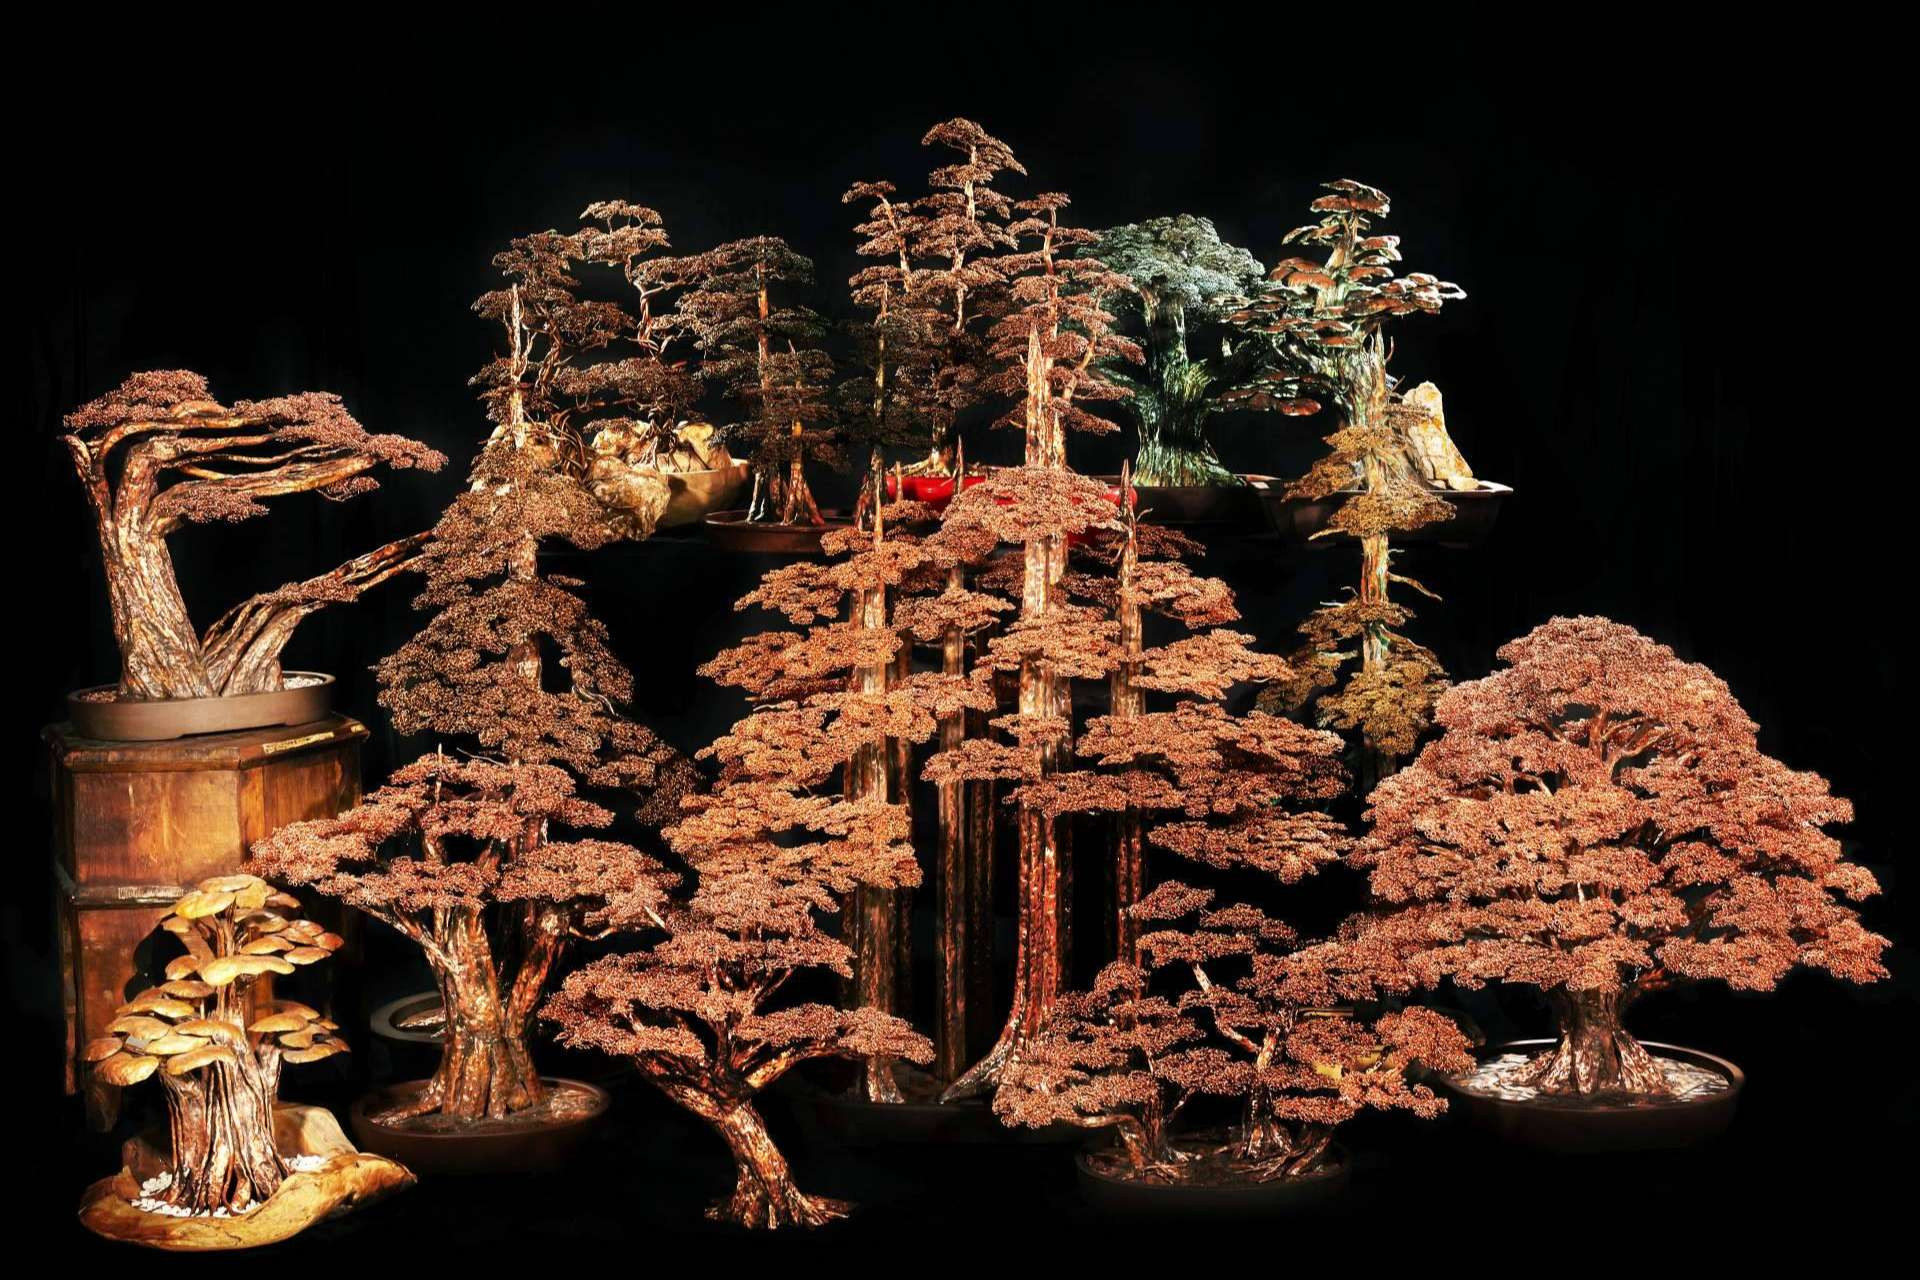 Art and nature go hand in hand with the sculptures of Badiola & Copper